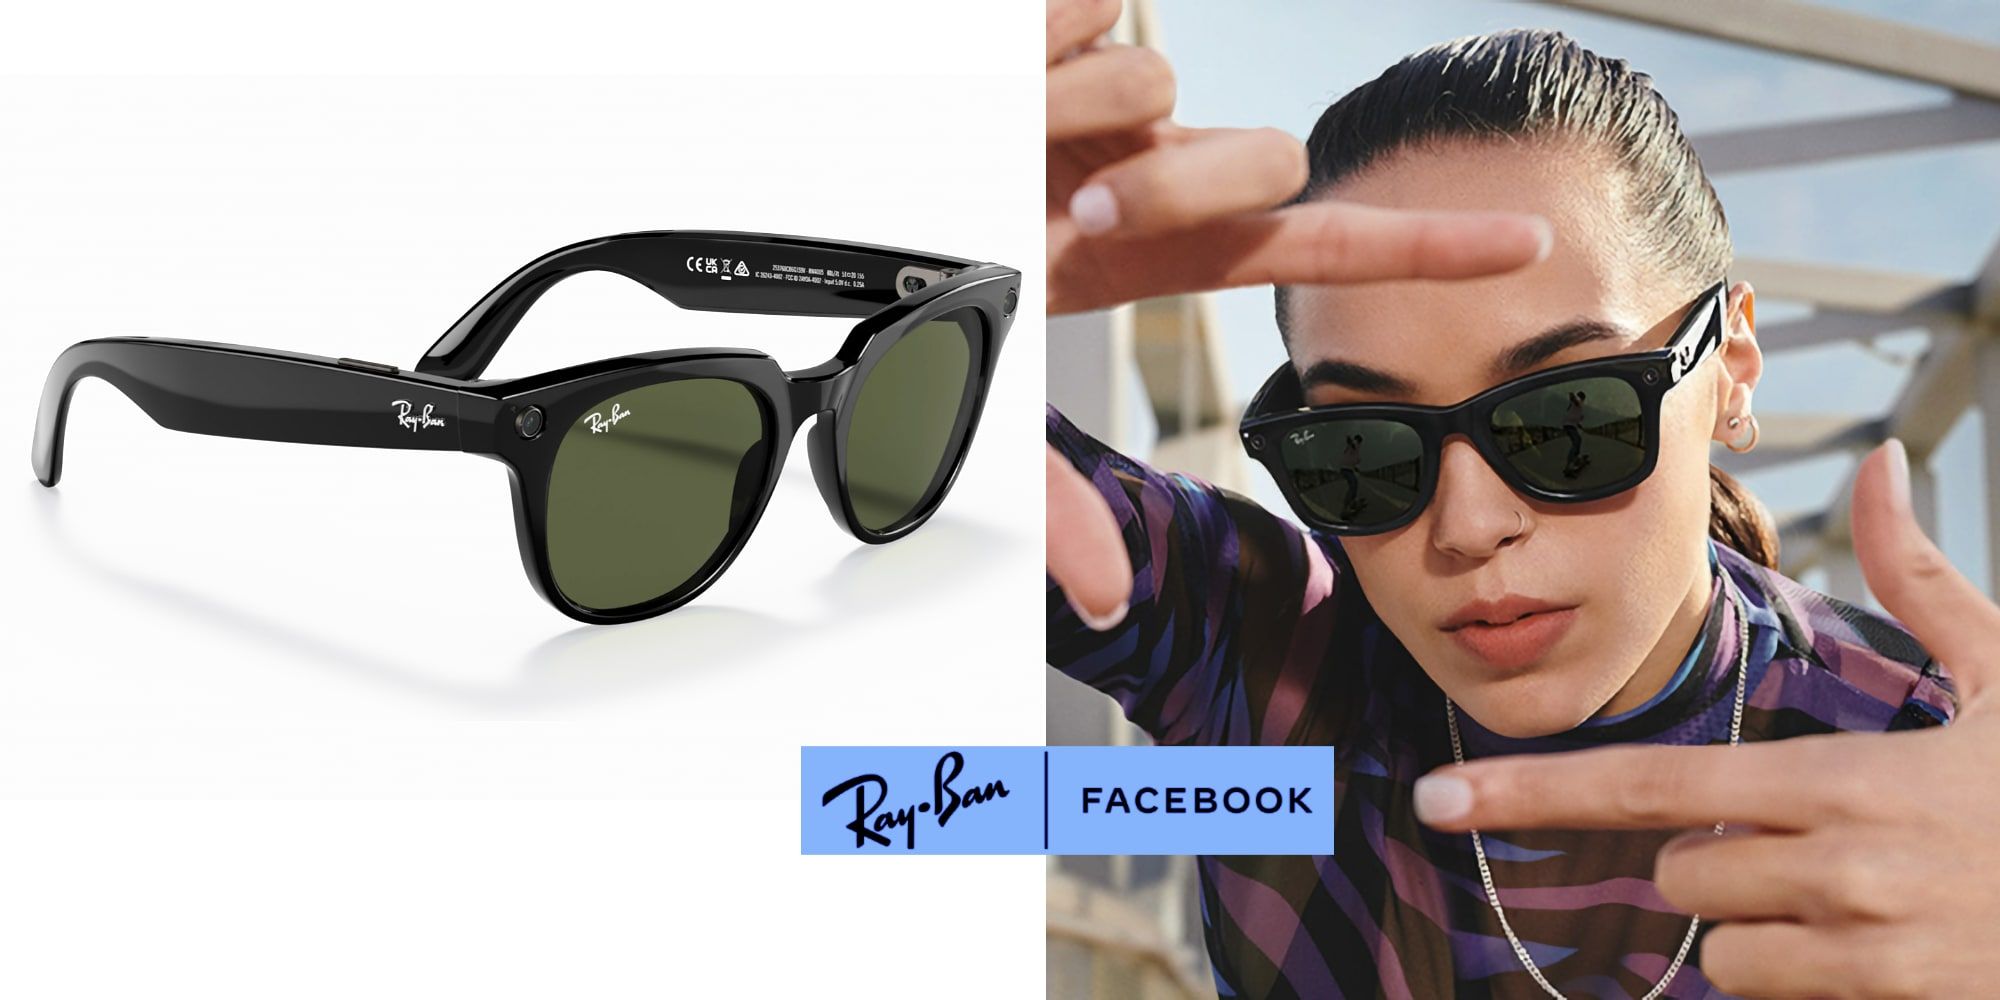 Facebook Ray Ban Stories Smart Glasses Beside Model Pointing To Facebook Logo